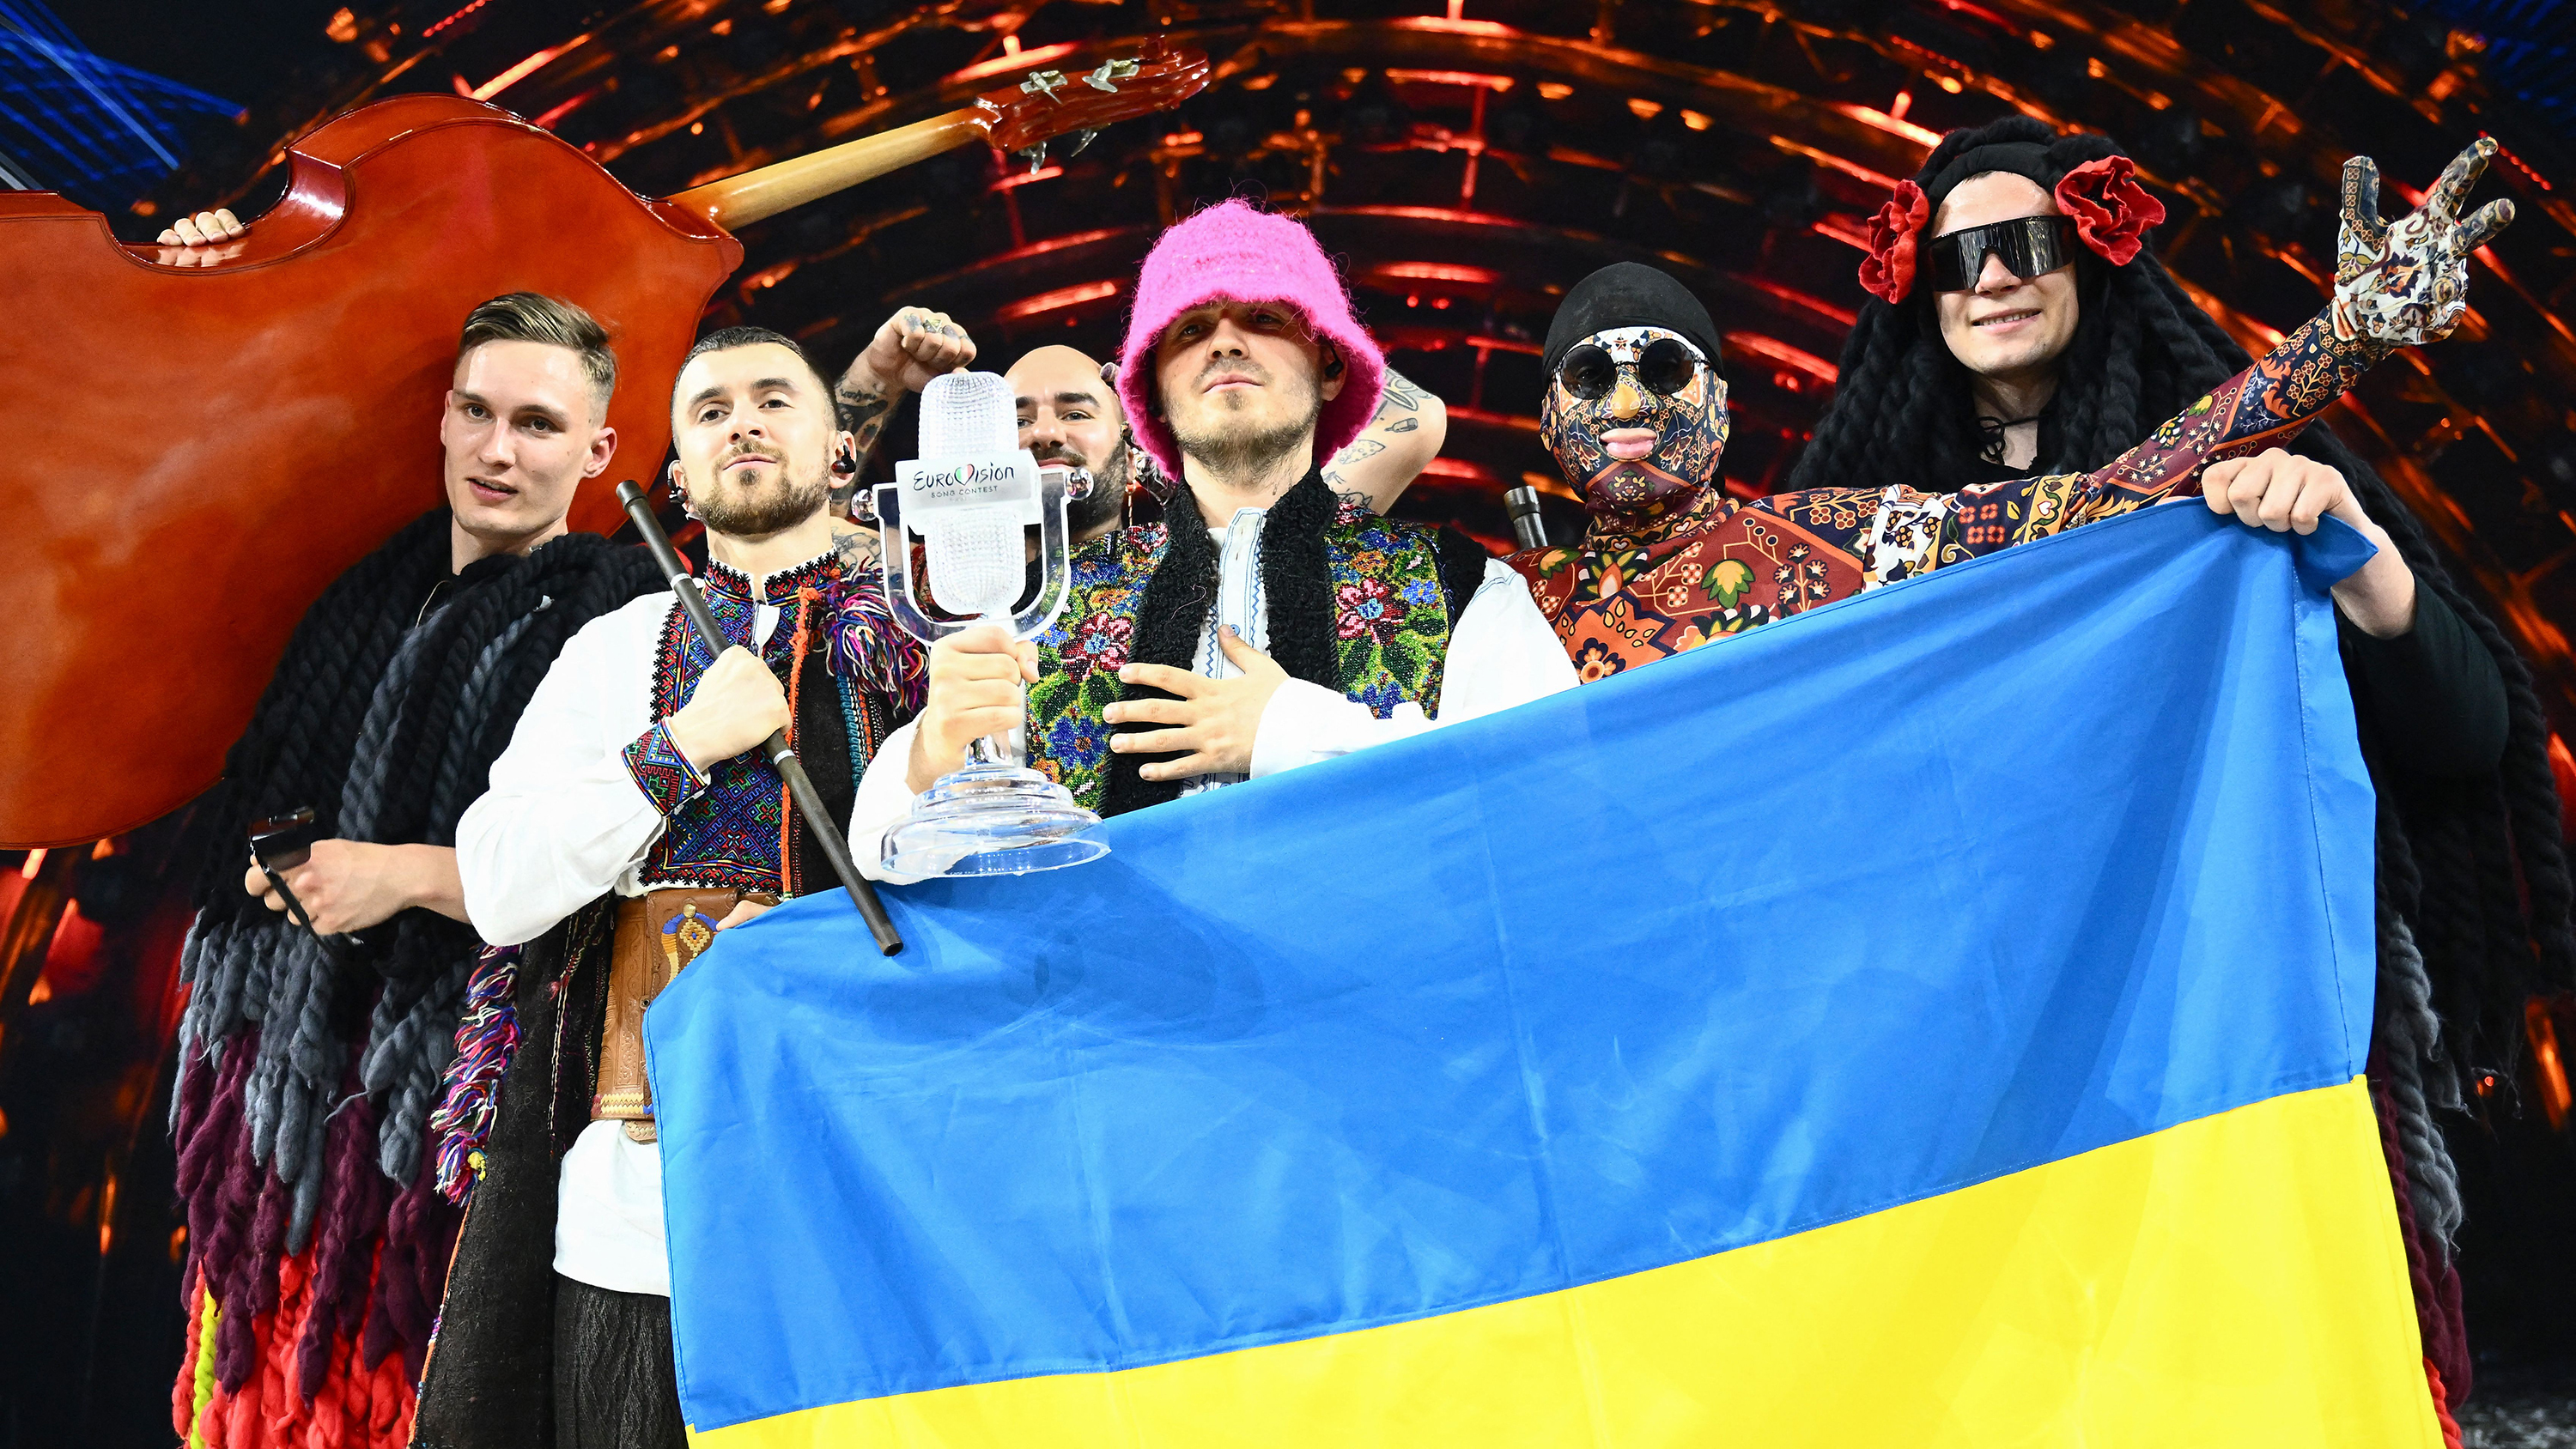 Members of the band Kalush Orchestra pose onstage with their trophy after winning Eurovision on May 14. 